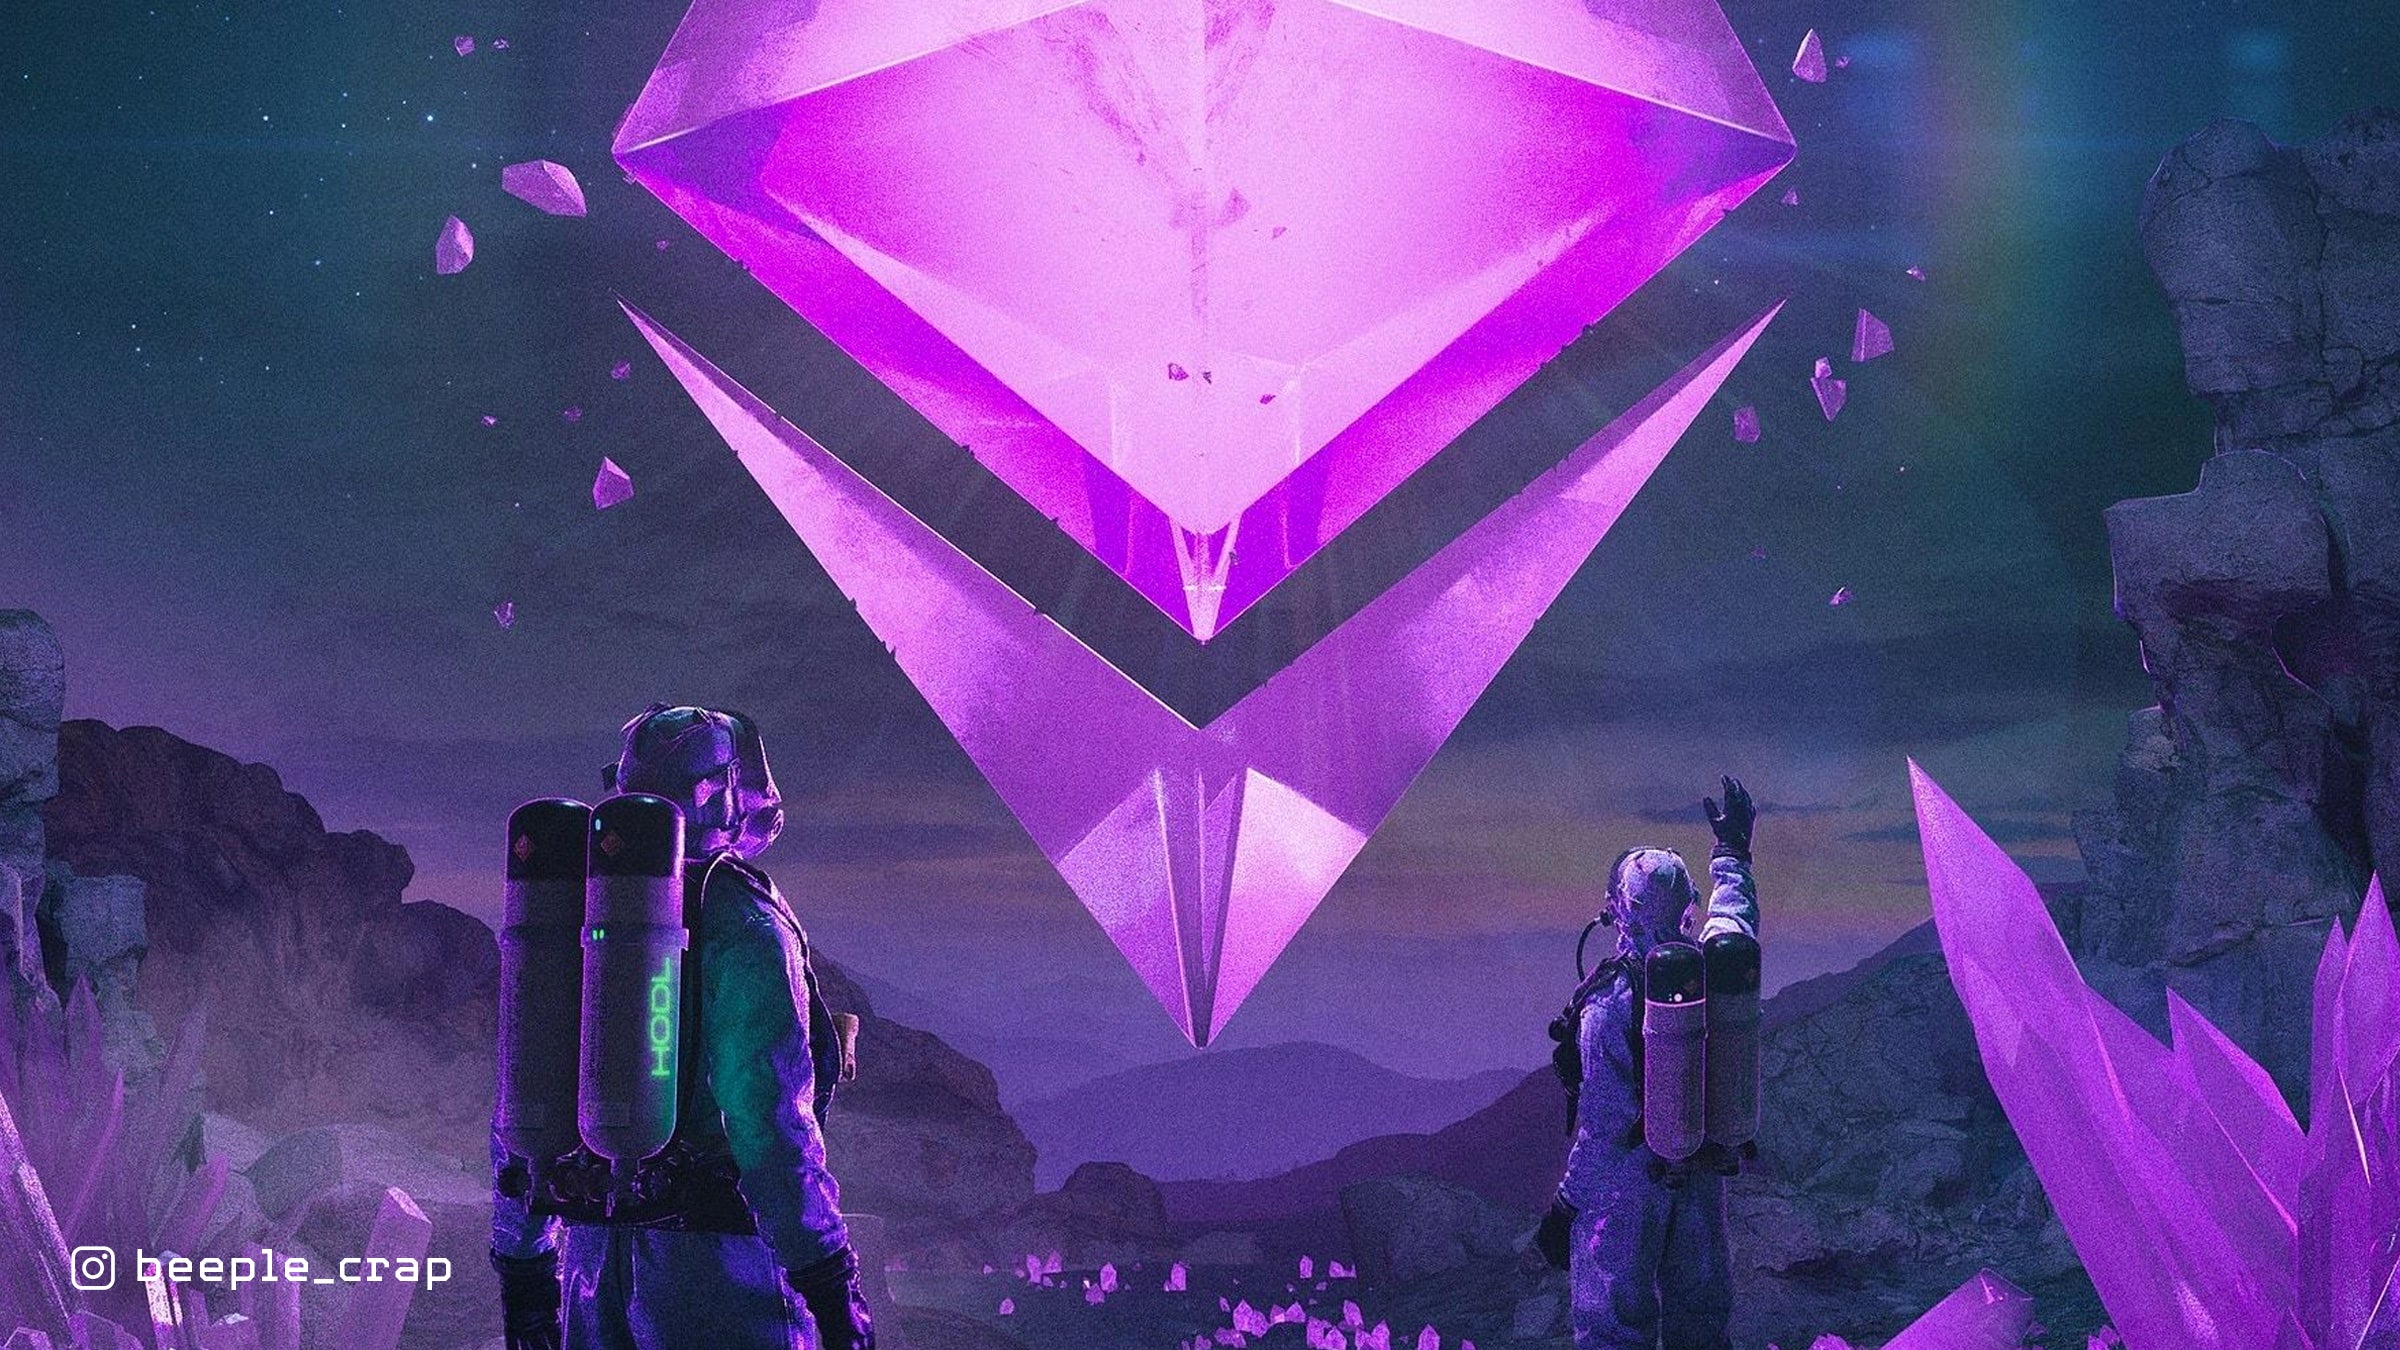 Louis Vuitton to launch NFT game with art work from Beeple - Crypto Daily